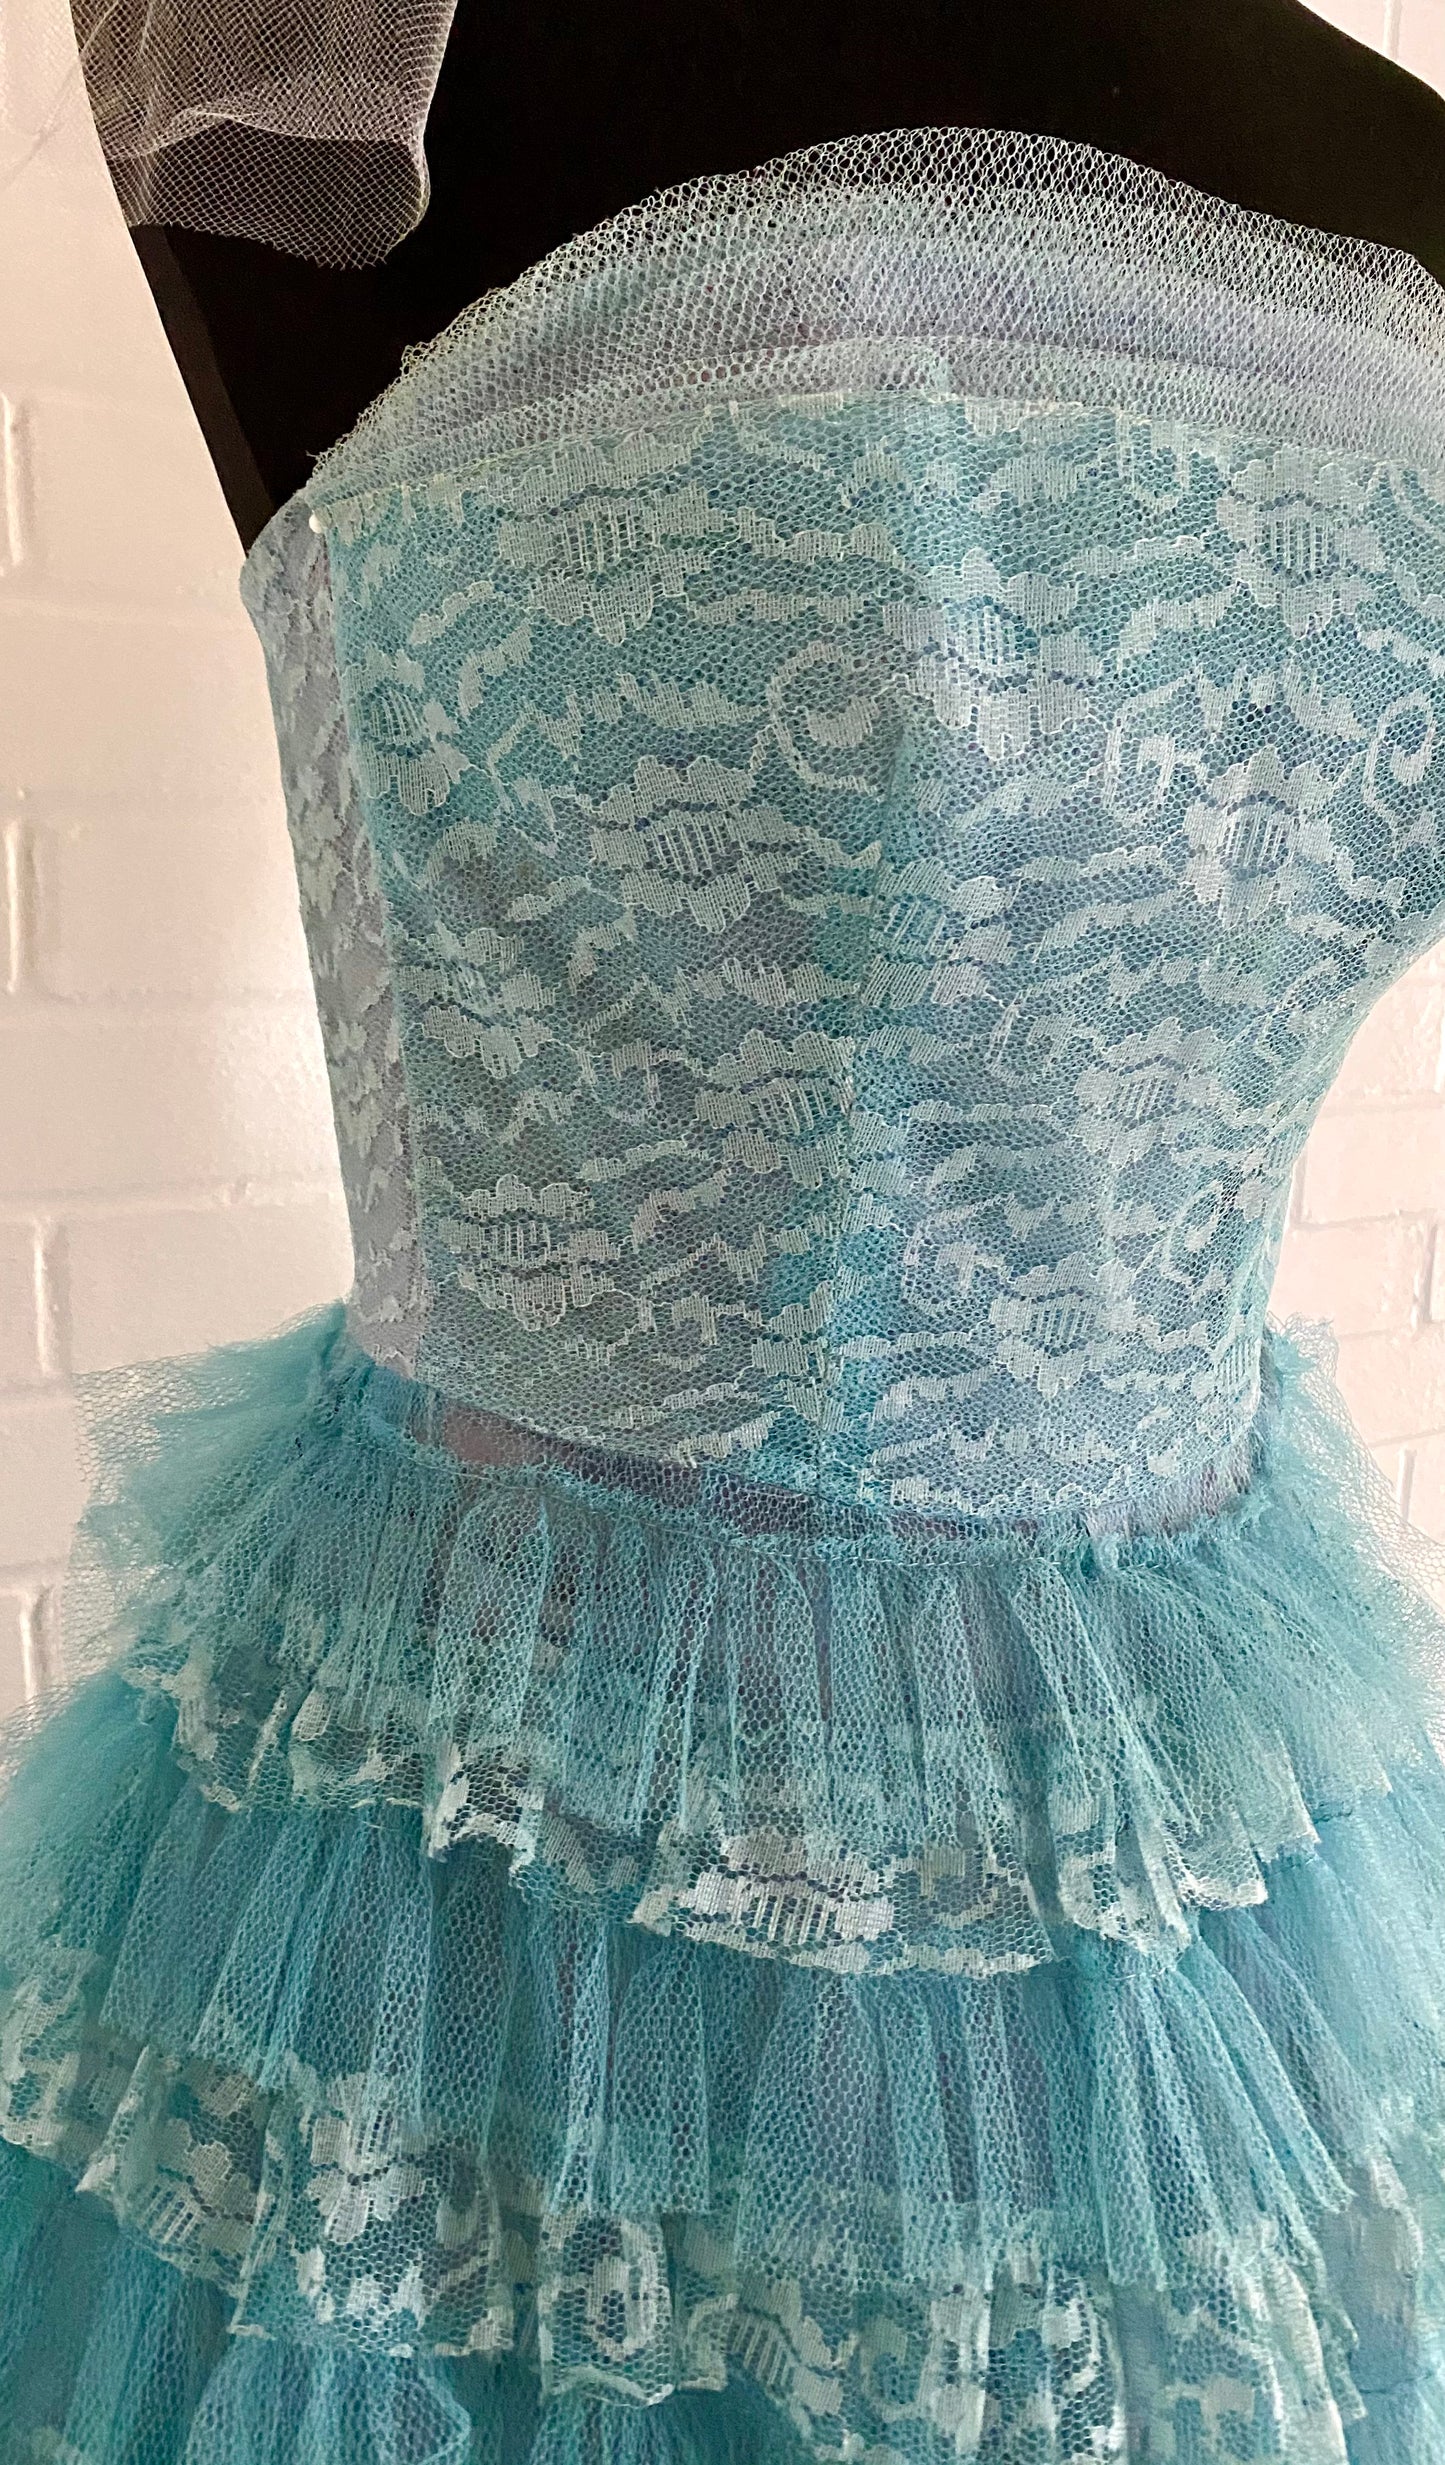 Late 50s/ Early 60s Tulle Strapless Formal Dress